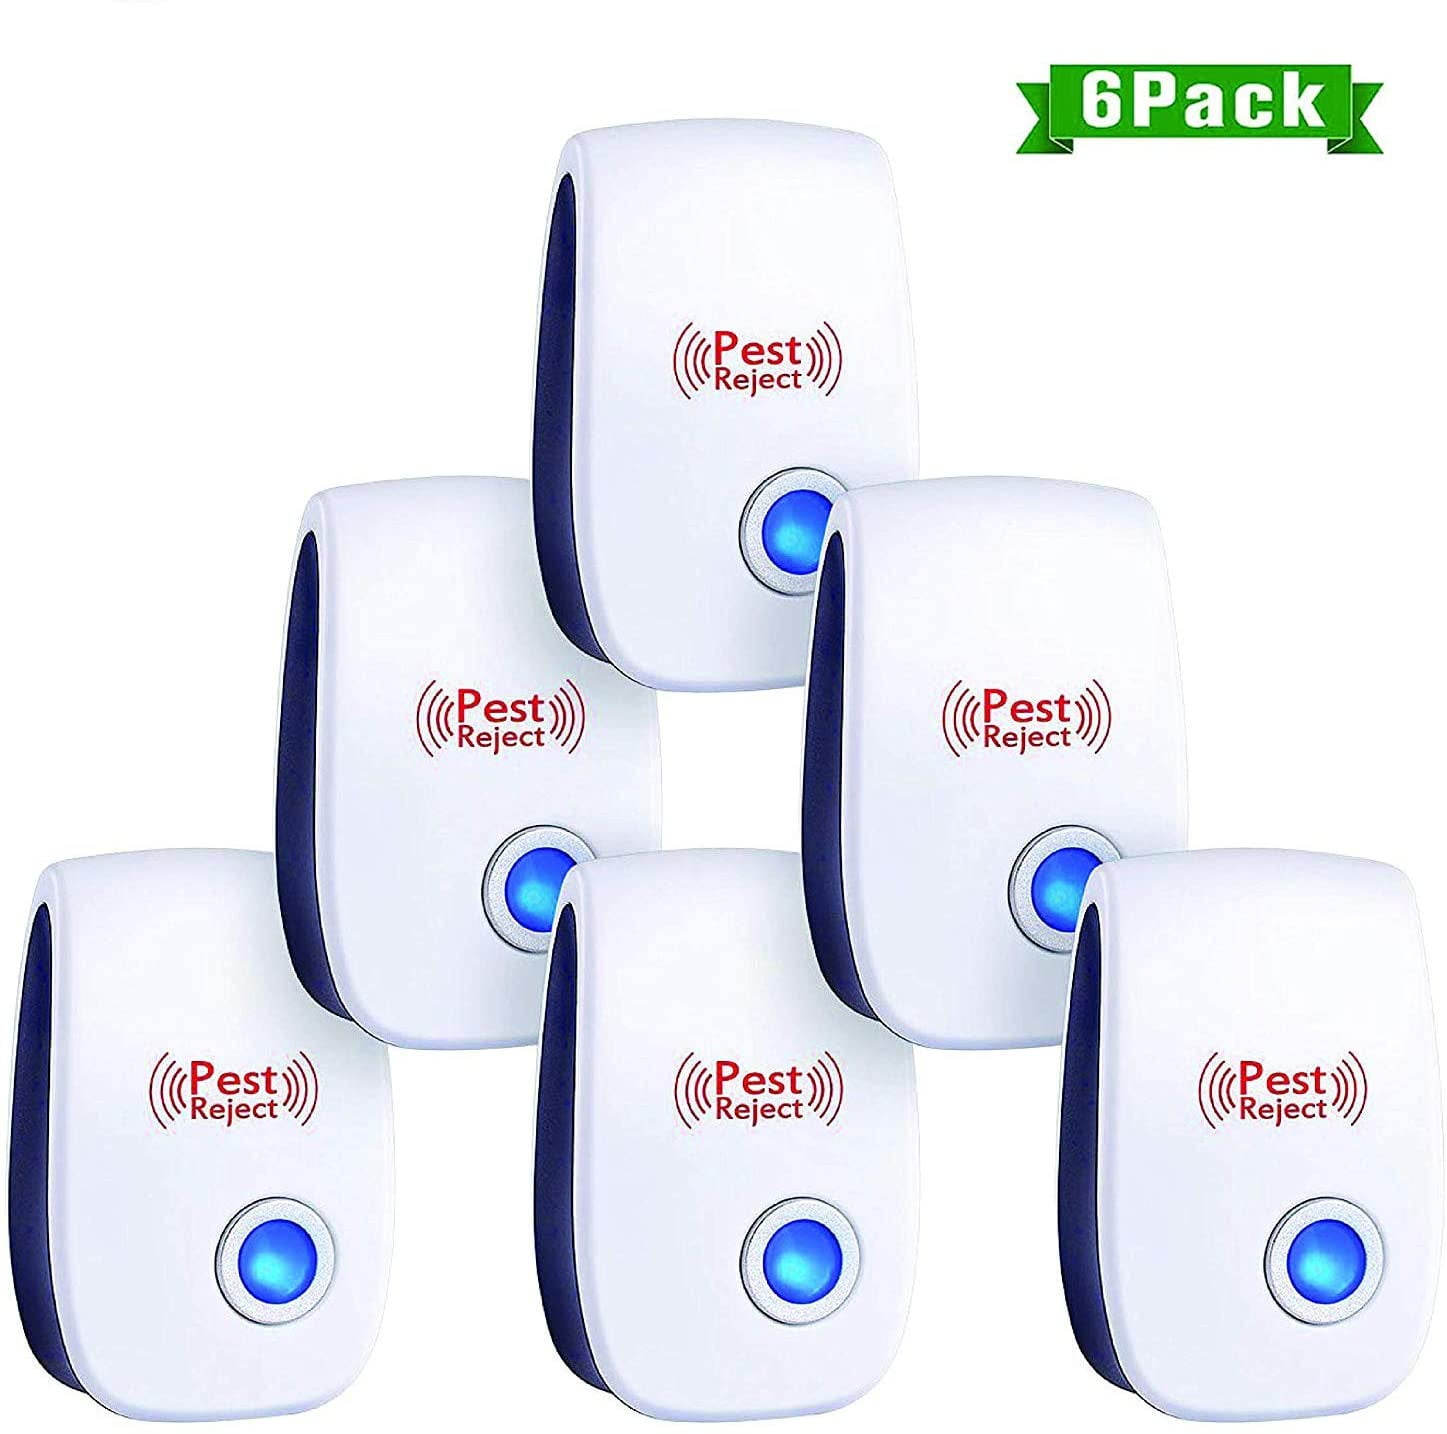 2020 UPGRADED Ultrasonic Pest Repellent Plug in Pest Control 100% Safe For Human and Pet Indoor Pest Control Ultrasonic Repellent for Mice Cockroach Spider Ultrasonic Pest Repeller 6 Pack Mosquito 